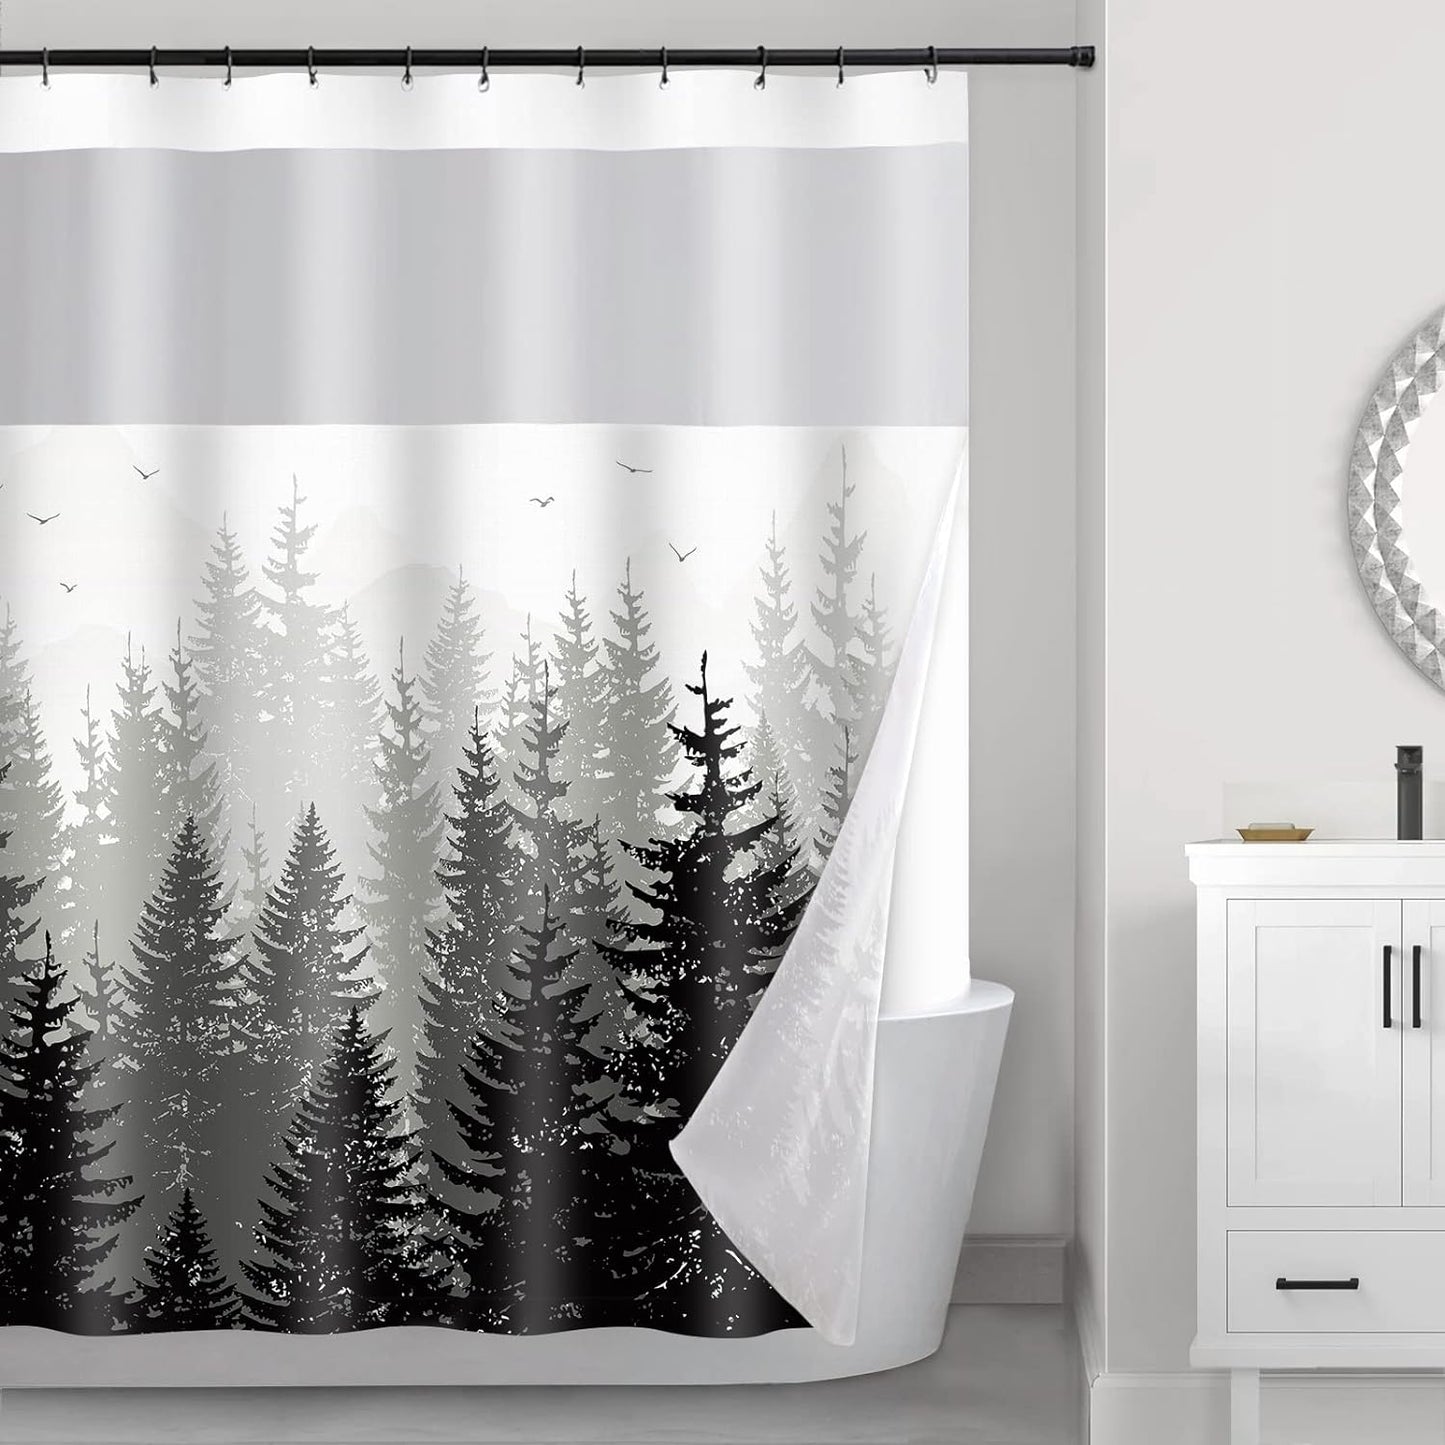 Forest Shower Curtain with snap-in Fabric Liner, Gray Mountain Nature Tree Shower Curtains with Mesh Top Window for Bathroom Decor, Contemporary Bathroom Curtains, See Through Sheer Window, 71x71